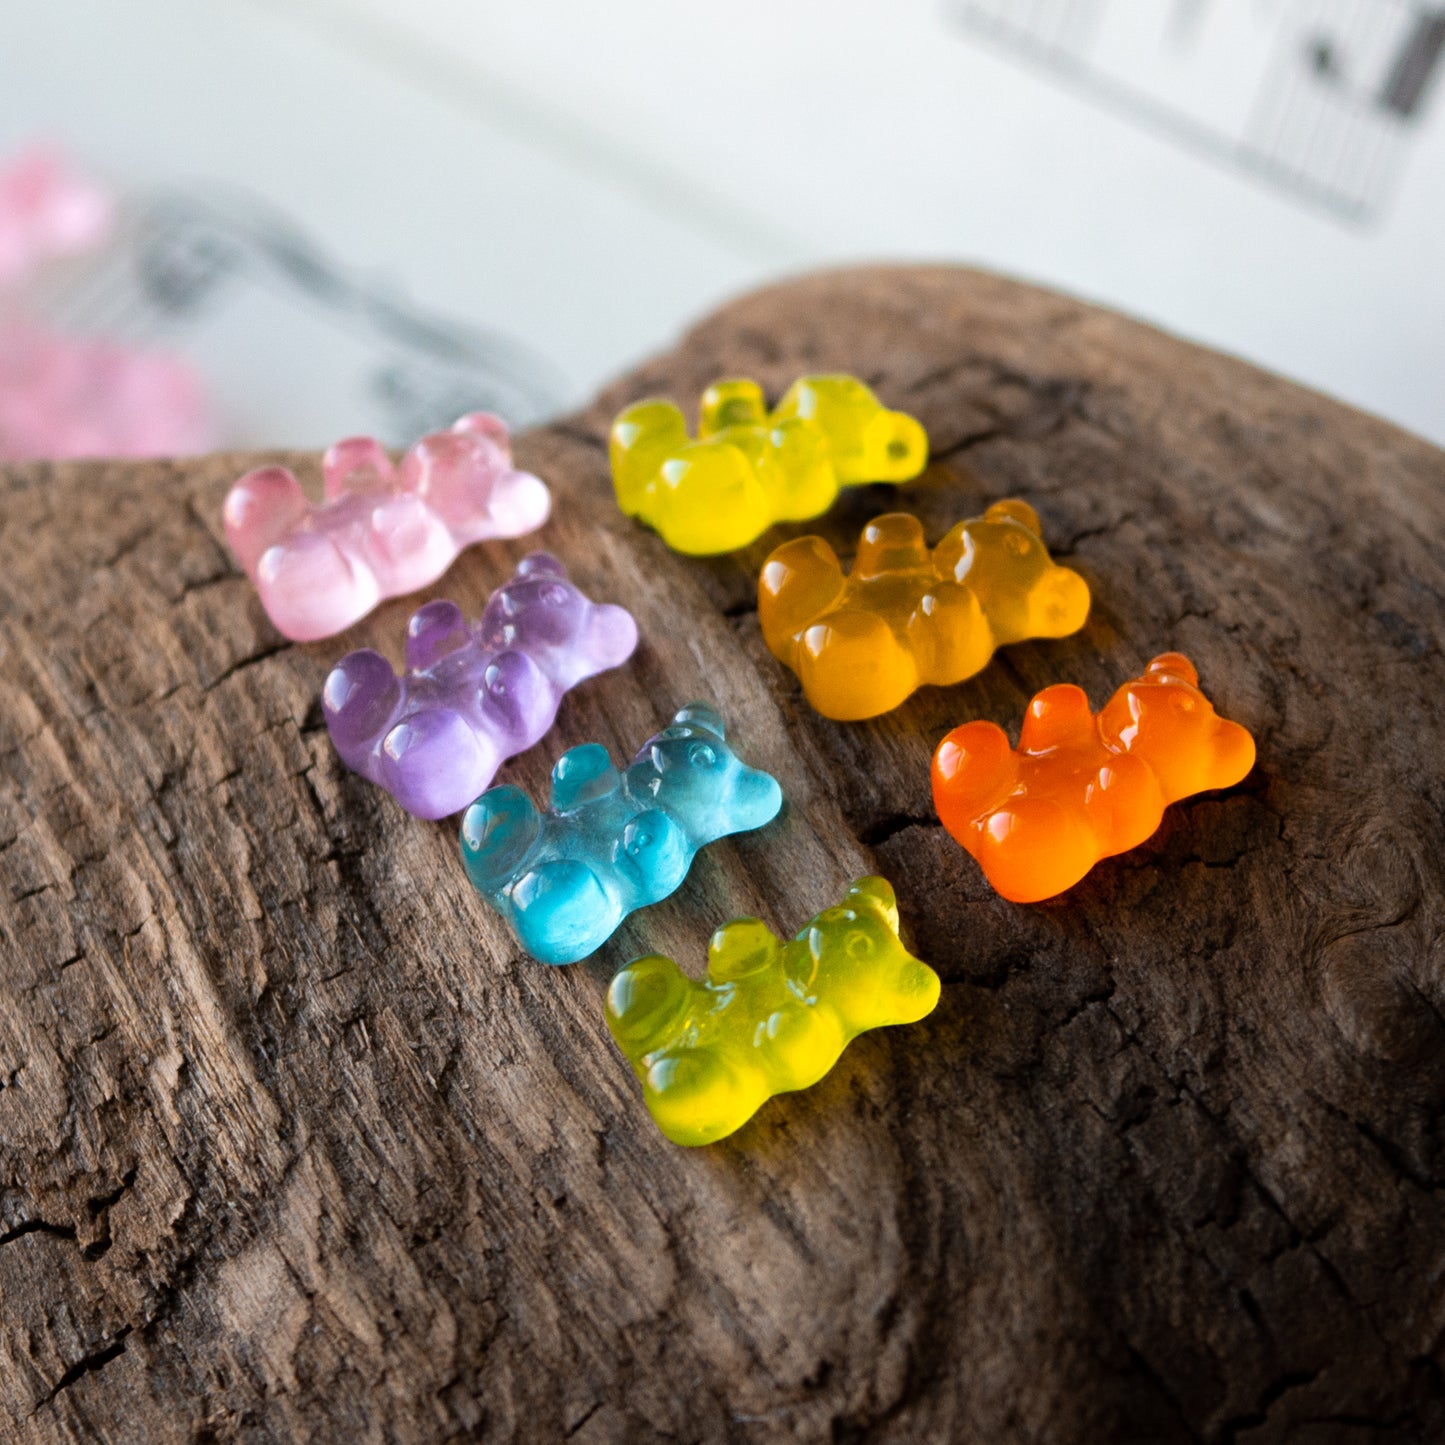 12x7mm Gummy Bear Shaped Cabochons in Colorful Resin